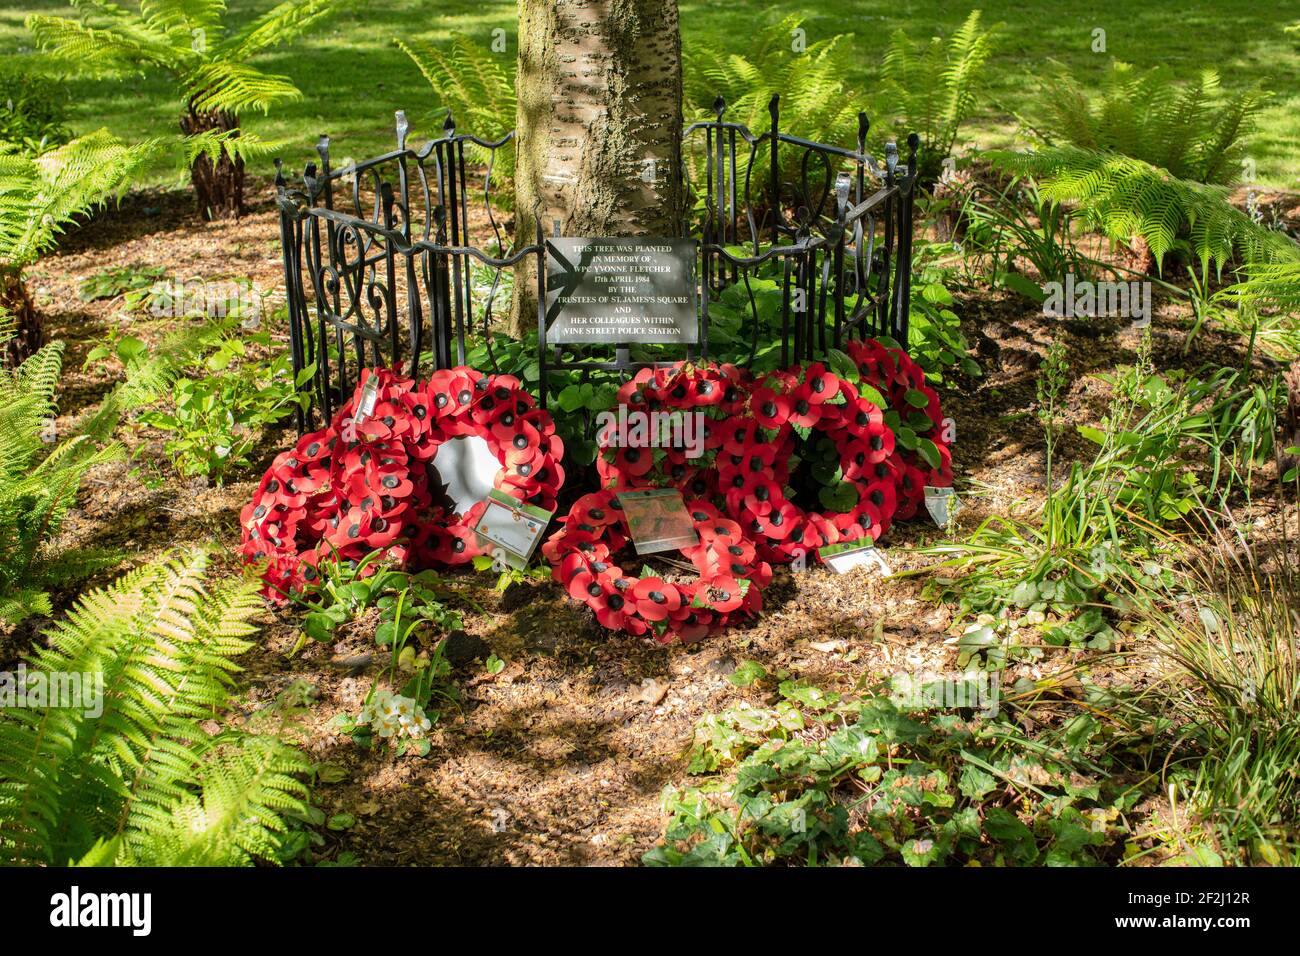 Tree planted in memory of Yvonne Fletcher, WPC shot and killed from the Libyan Embassy, St James's Square, London; surrounded by poppy wreaths Stock Photo